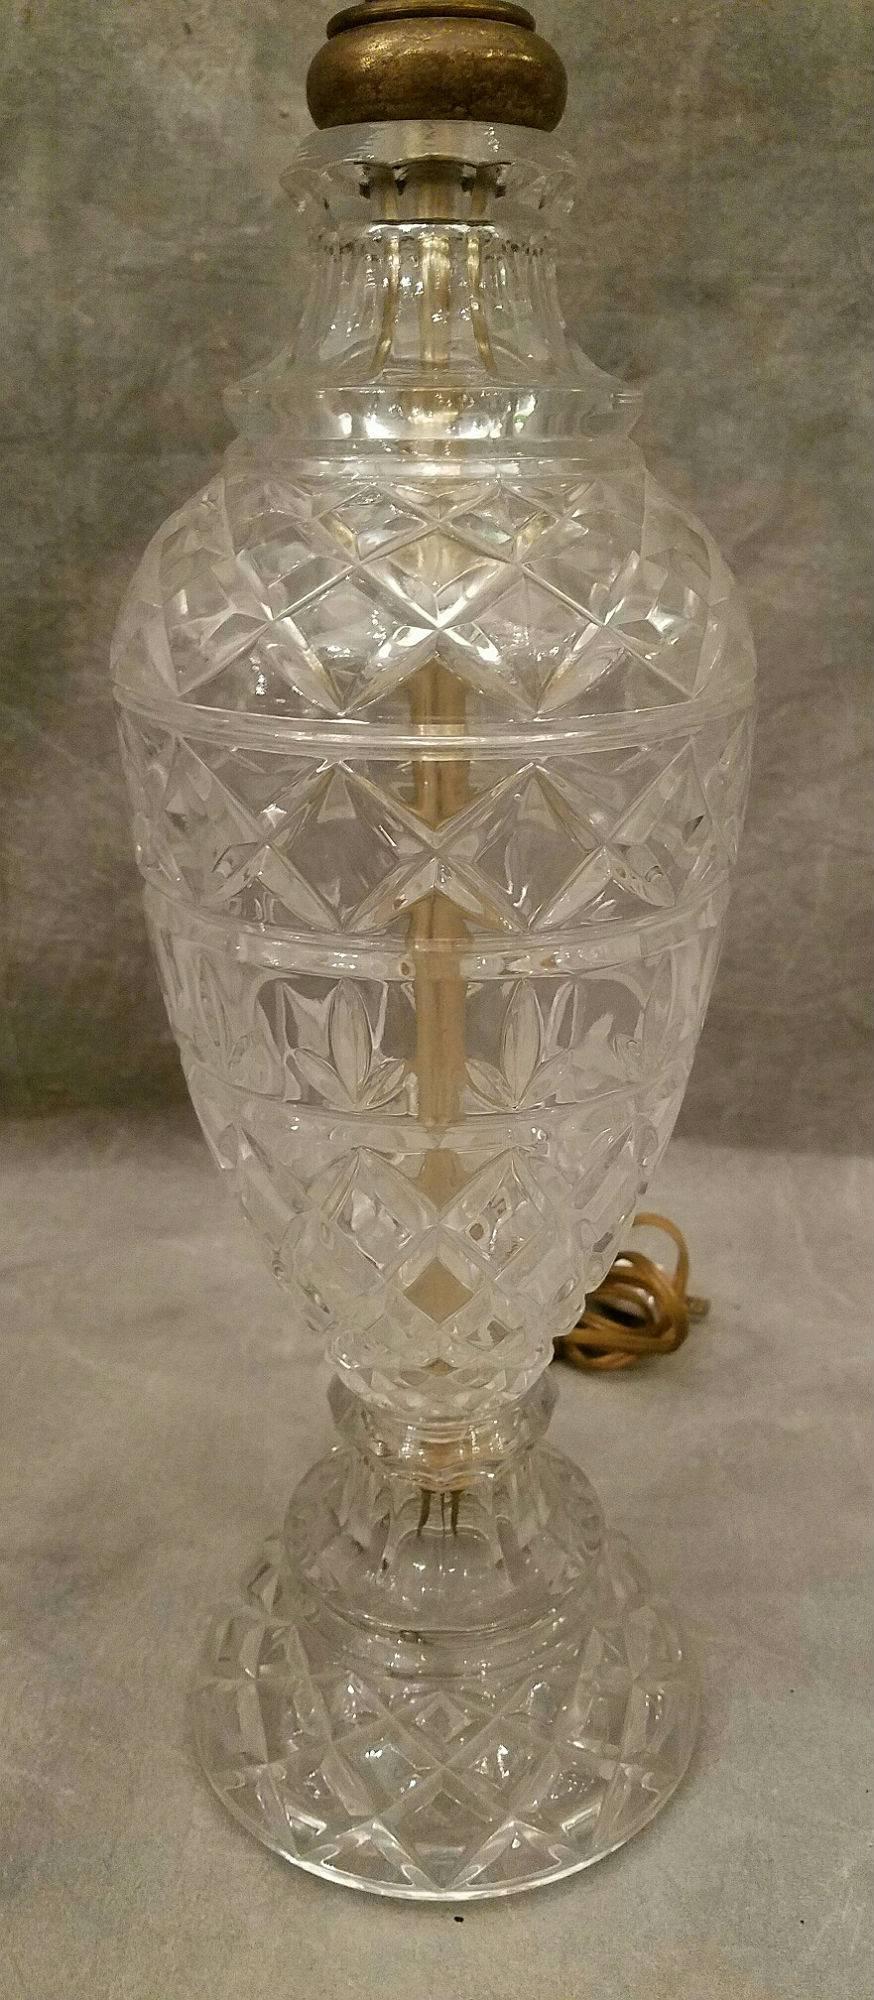 Crystal table lamp.

Measures: Height to top of socket 21